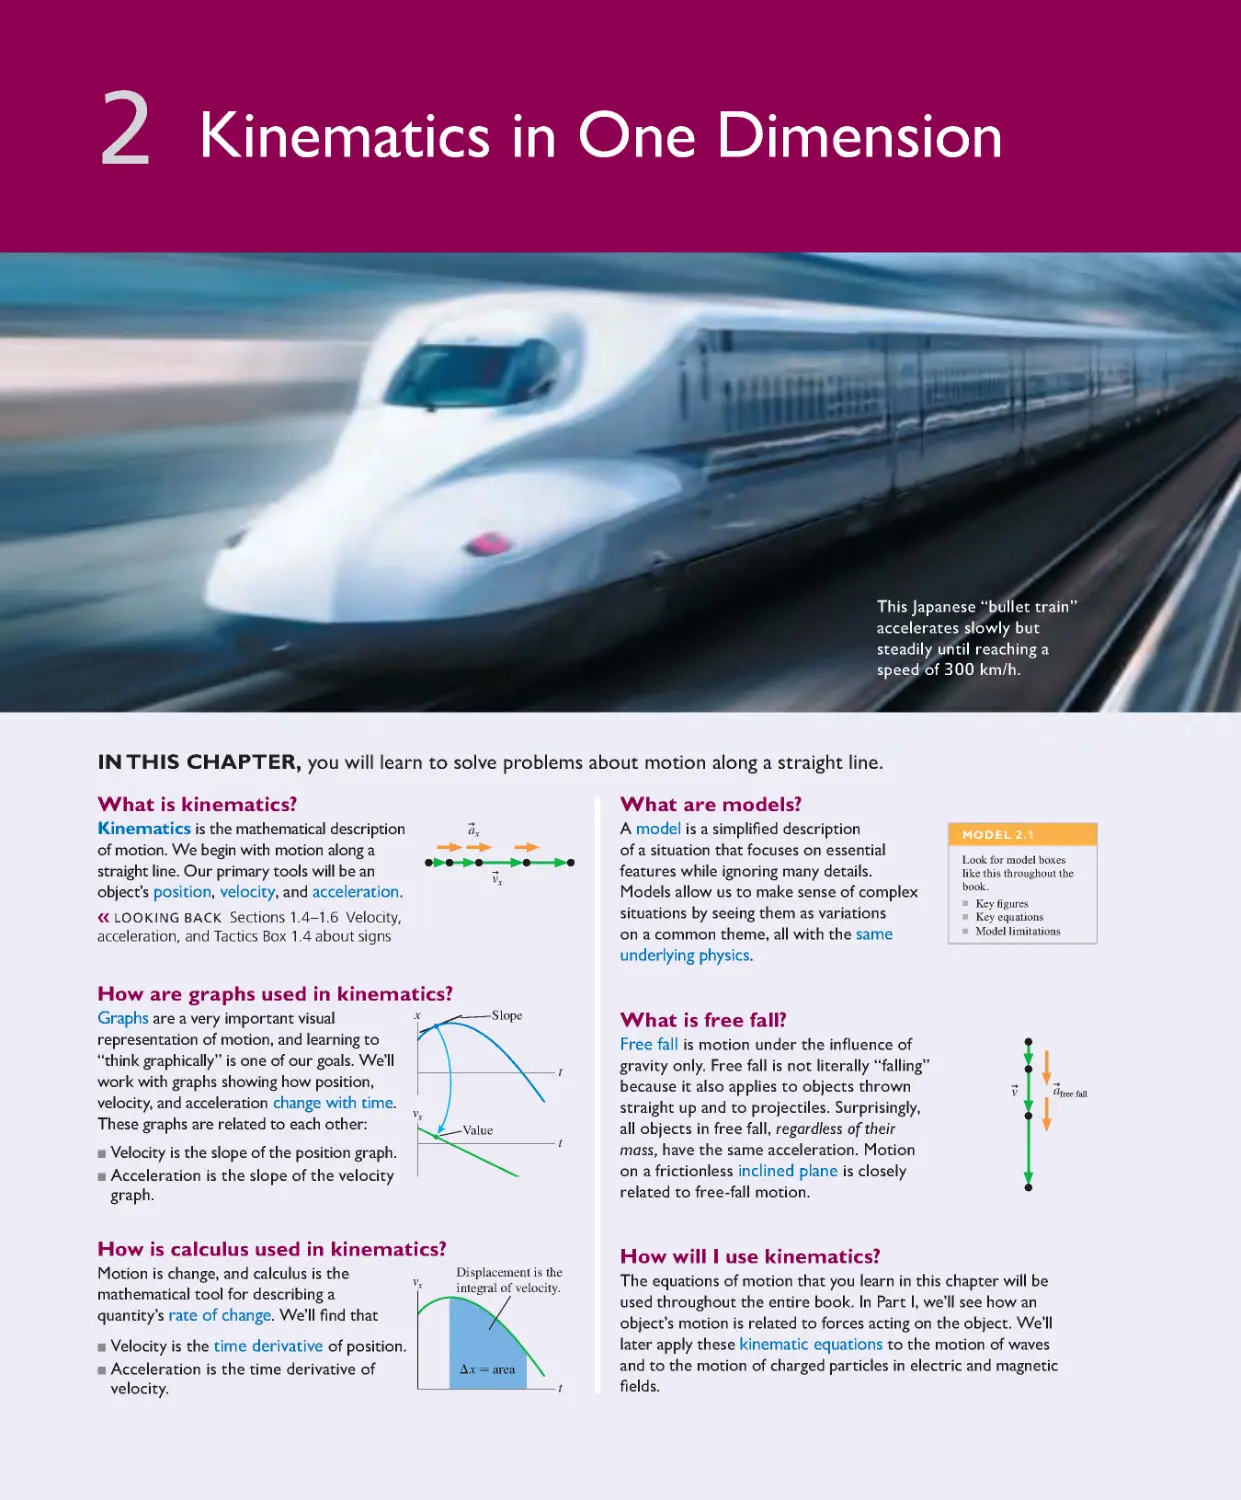 Chapter 2: Kinematics in One Dimension